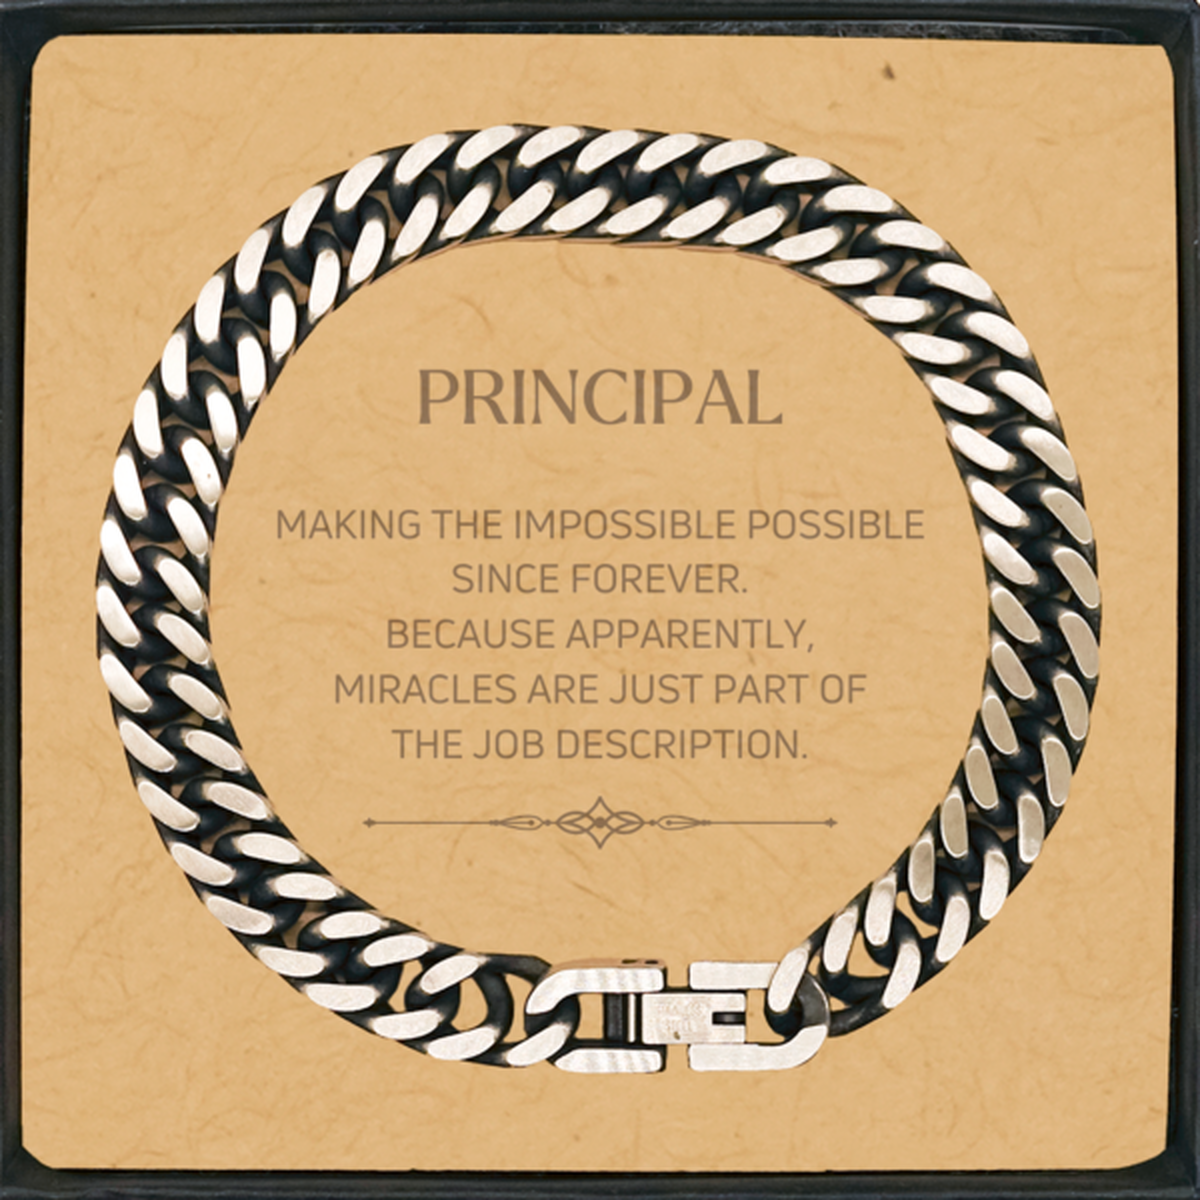 Funny Principal Gifts, Miracles are just part of the job description, Inspirational Birthday Cuban Link Chain Bracelet For Principal, Men, Women, Coworkers, Friends, Boss